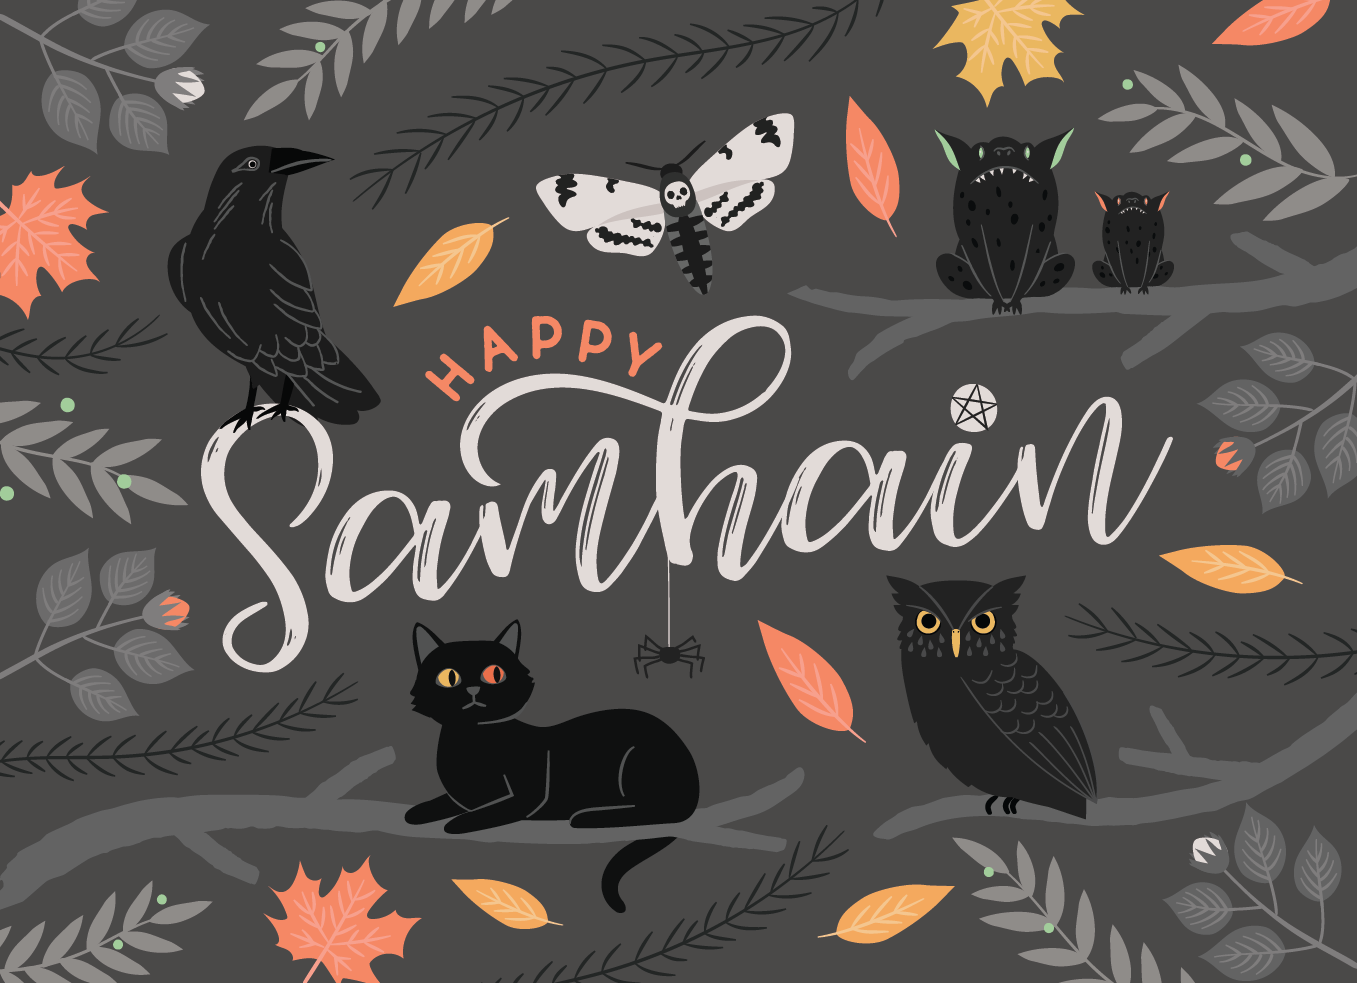 kr-happy-samhain-card-front.png